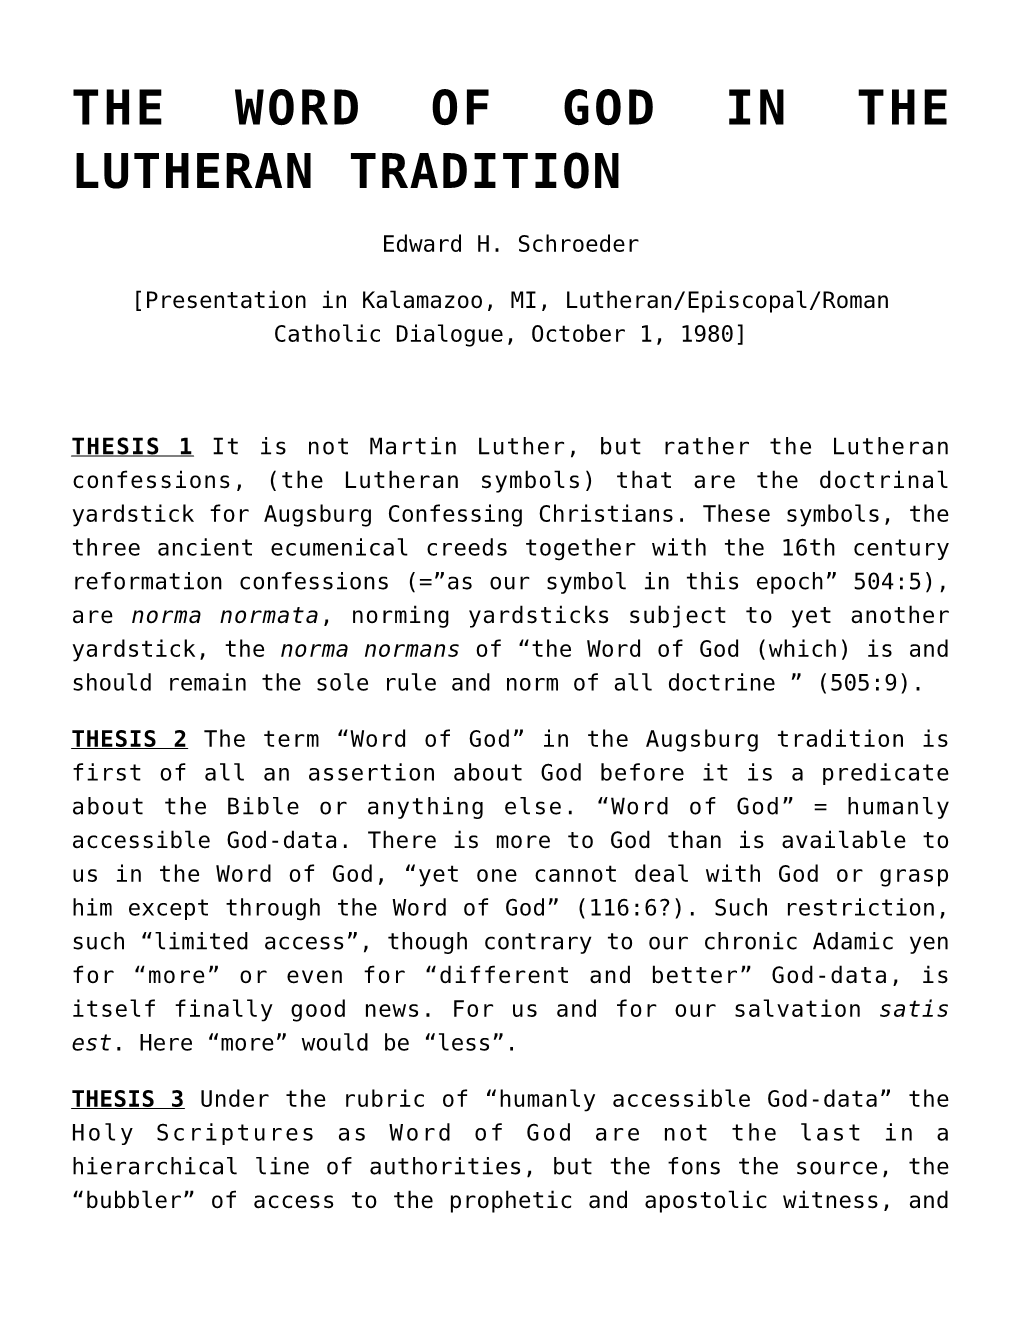 The Word of God in the Lutheran Tradition